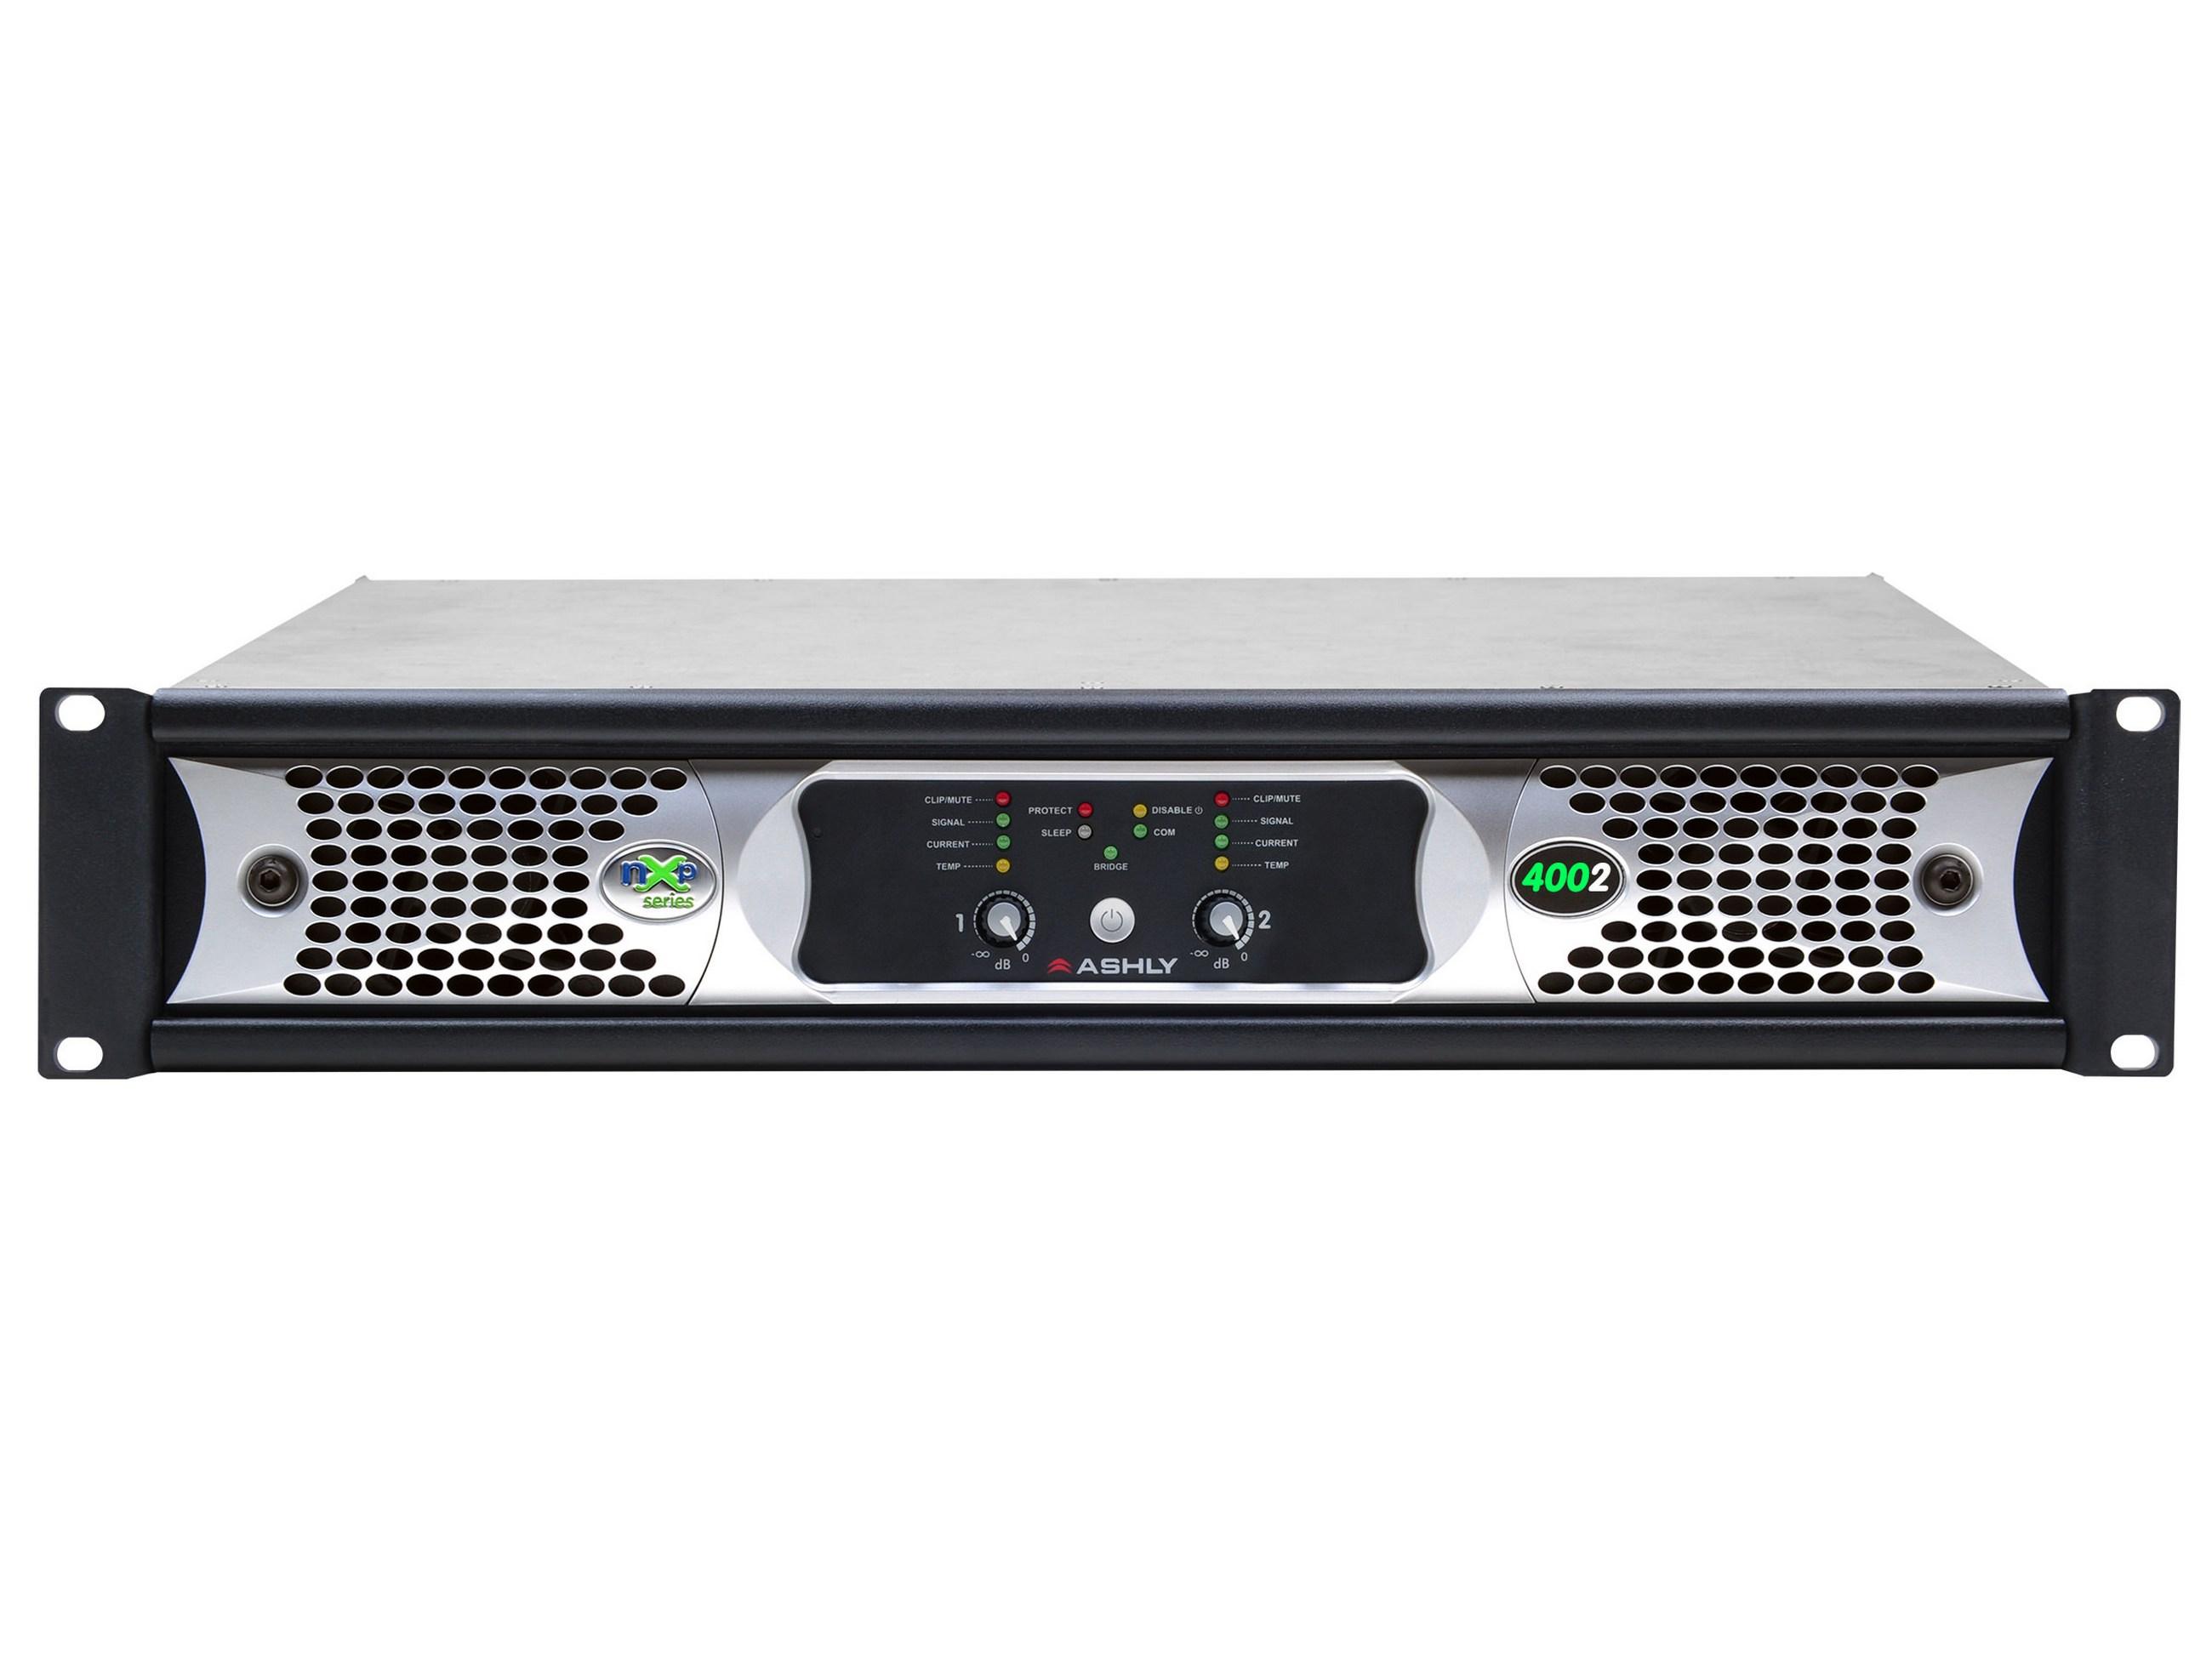 nXp4002 Network Power Amplifier 2 x 400 Watts/2 Ohms with Protea DSP by Ashly